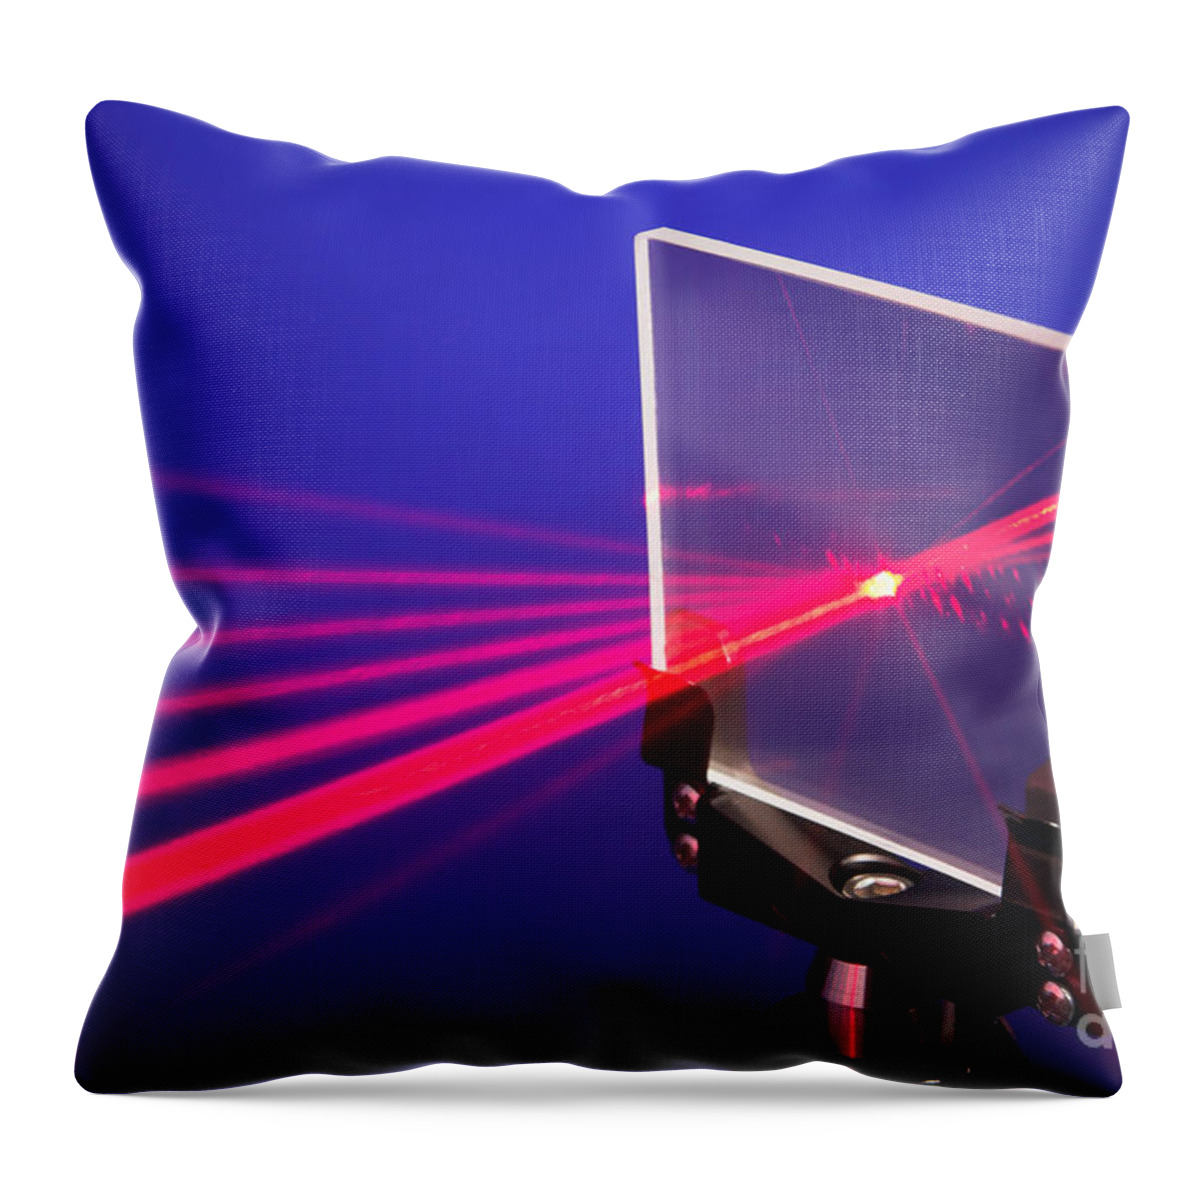 Beam Throw Pillow featuring the photograph Laser Diffraction by GIPhotoStock